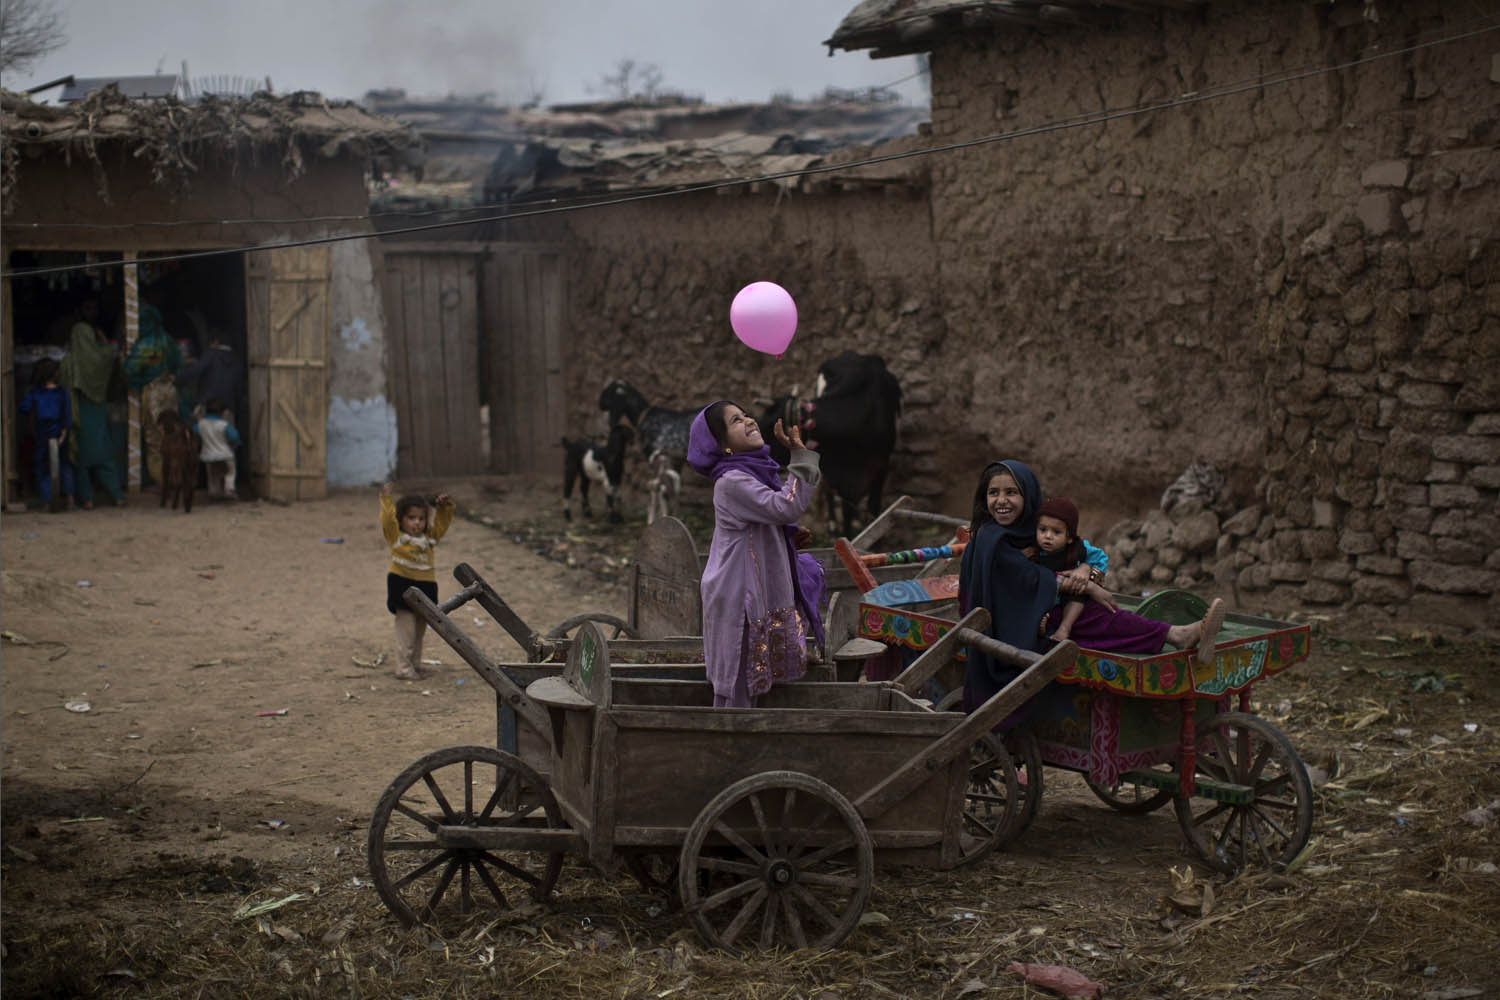 Feb. 2, 2014. An Afghan refugee girl, right, holding her younger brother, sits on a wooden-cart looking at her friend playing with a balloon in a poor neighborhood on the outskirts of Islamabad.